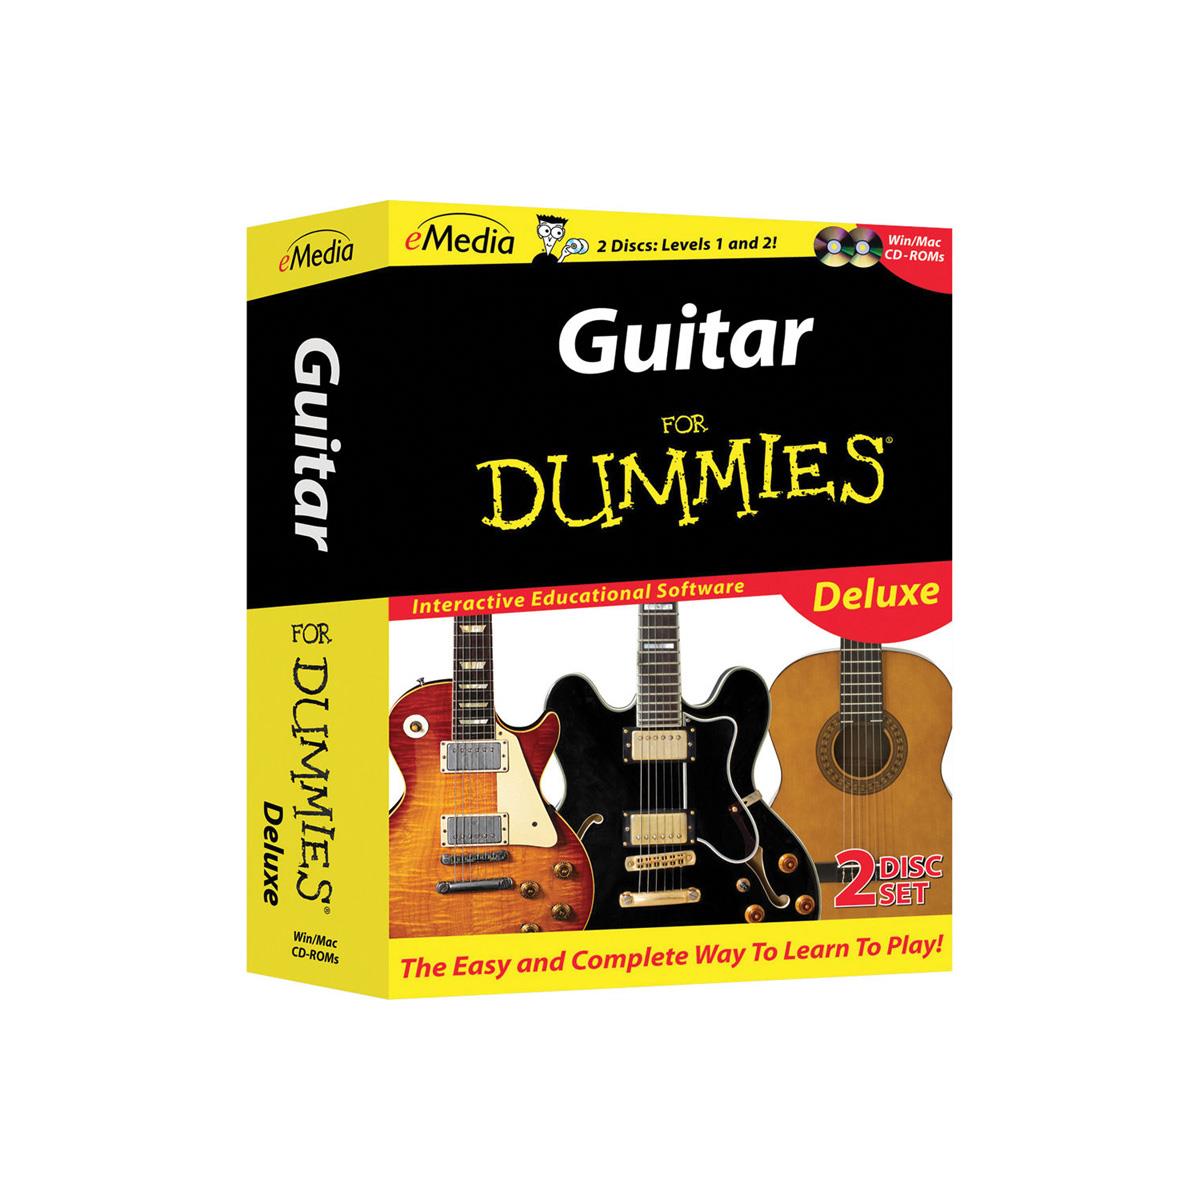 eMedia Guitar For Dummies Deluxe Software for Windows, Electronic Download -  FD09103DLW